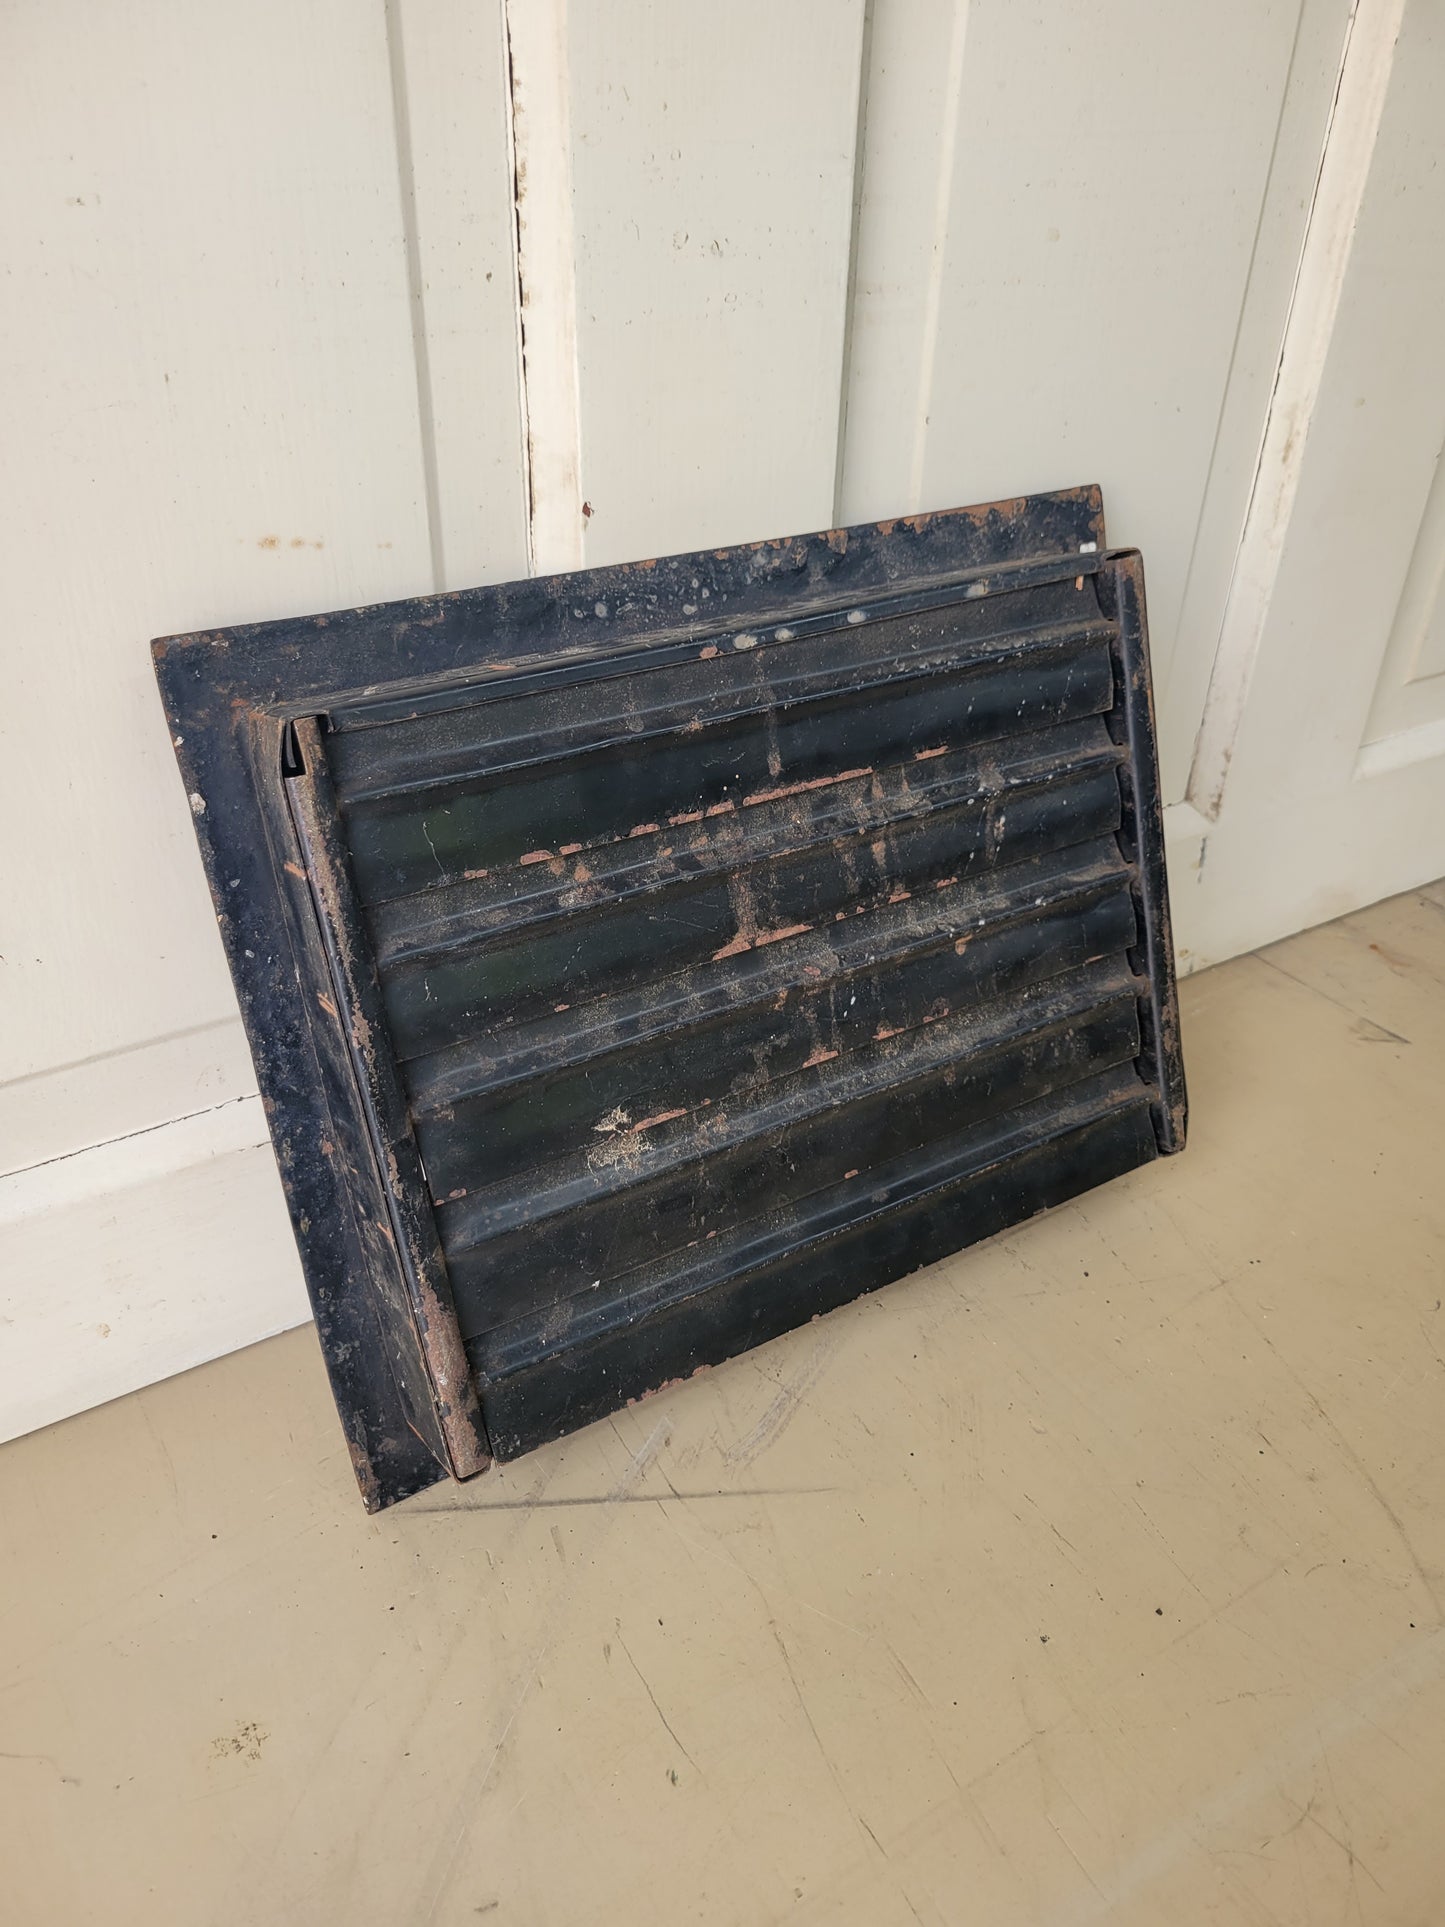 11 x 14 Antique Cast Iron Working Vent Cover, Floor Register Cover with Dampers #031802